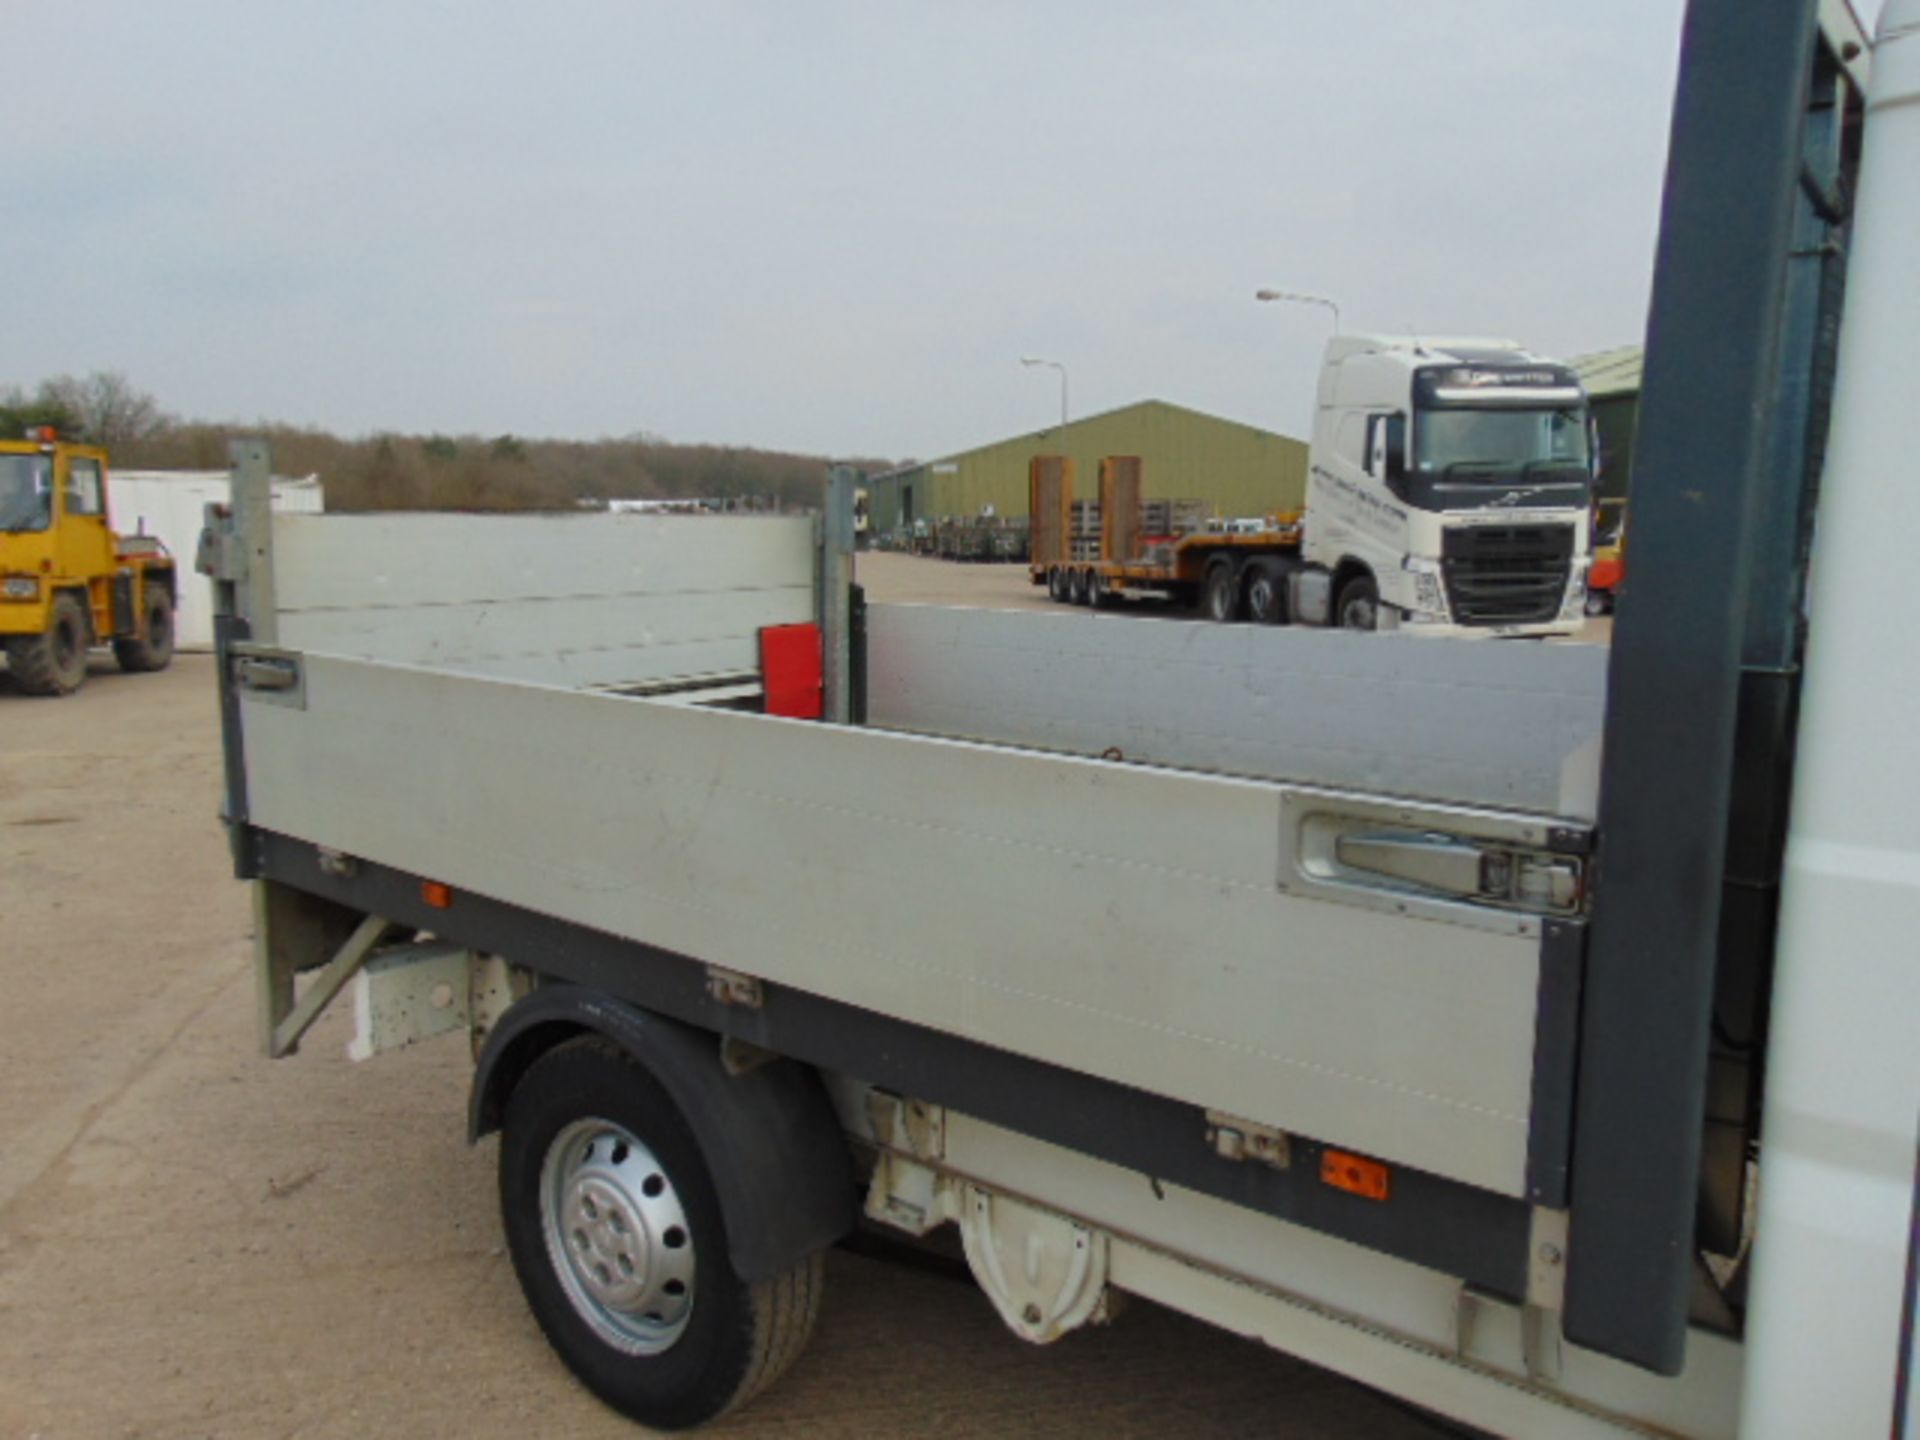 Citroen Relay 7 Seater Double Cab Dropside Pickup with 500kg Ratcliff Palfinger Tail Lift - Image 15 of 27